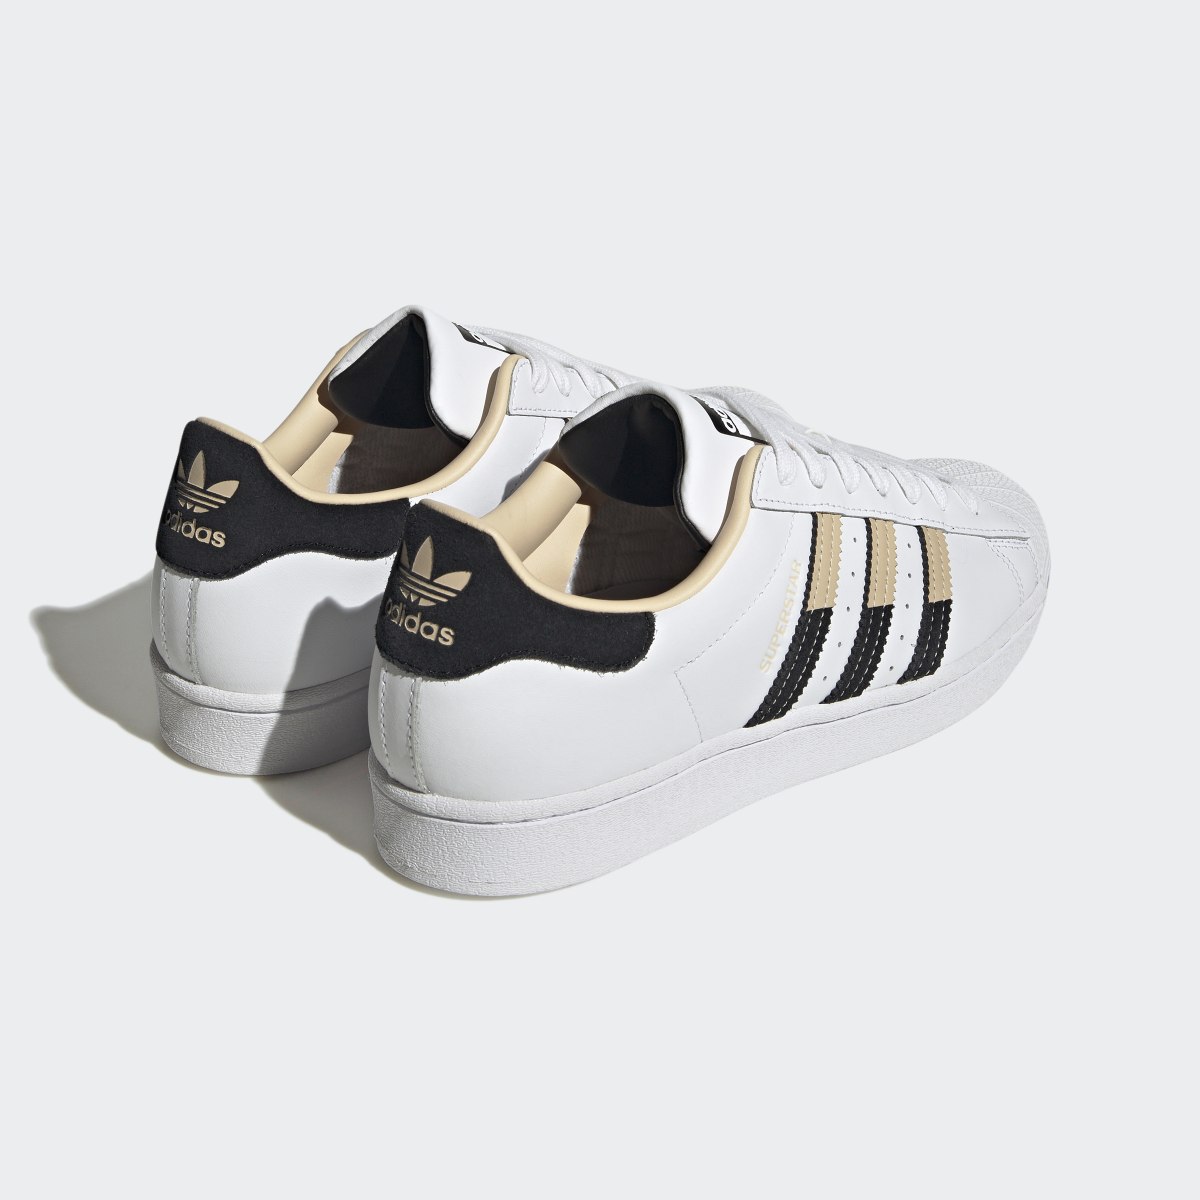 Adidas Superstar Shoes - HQ2166